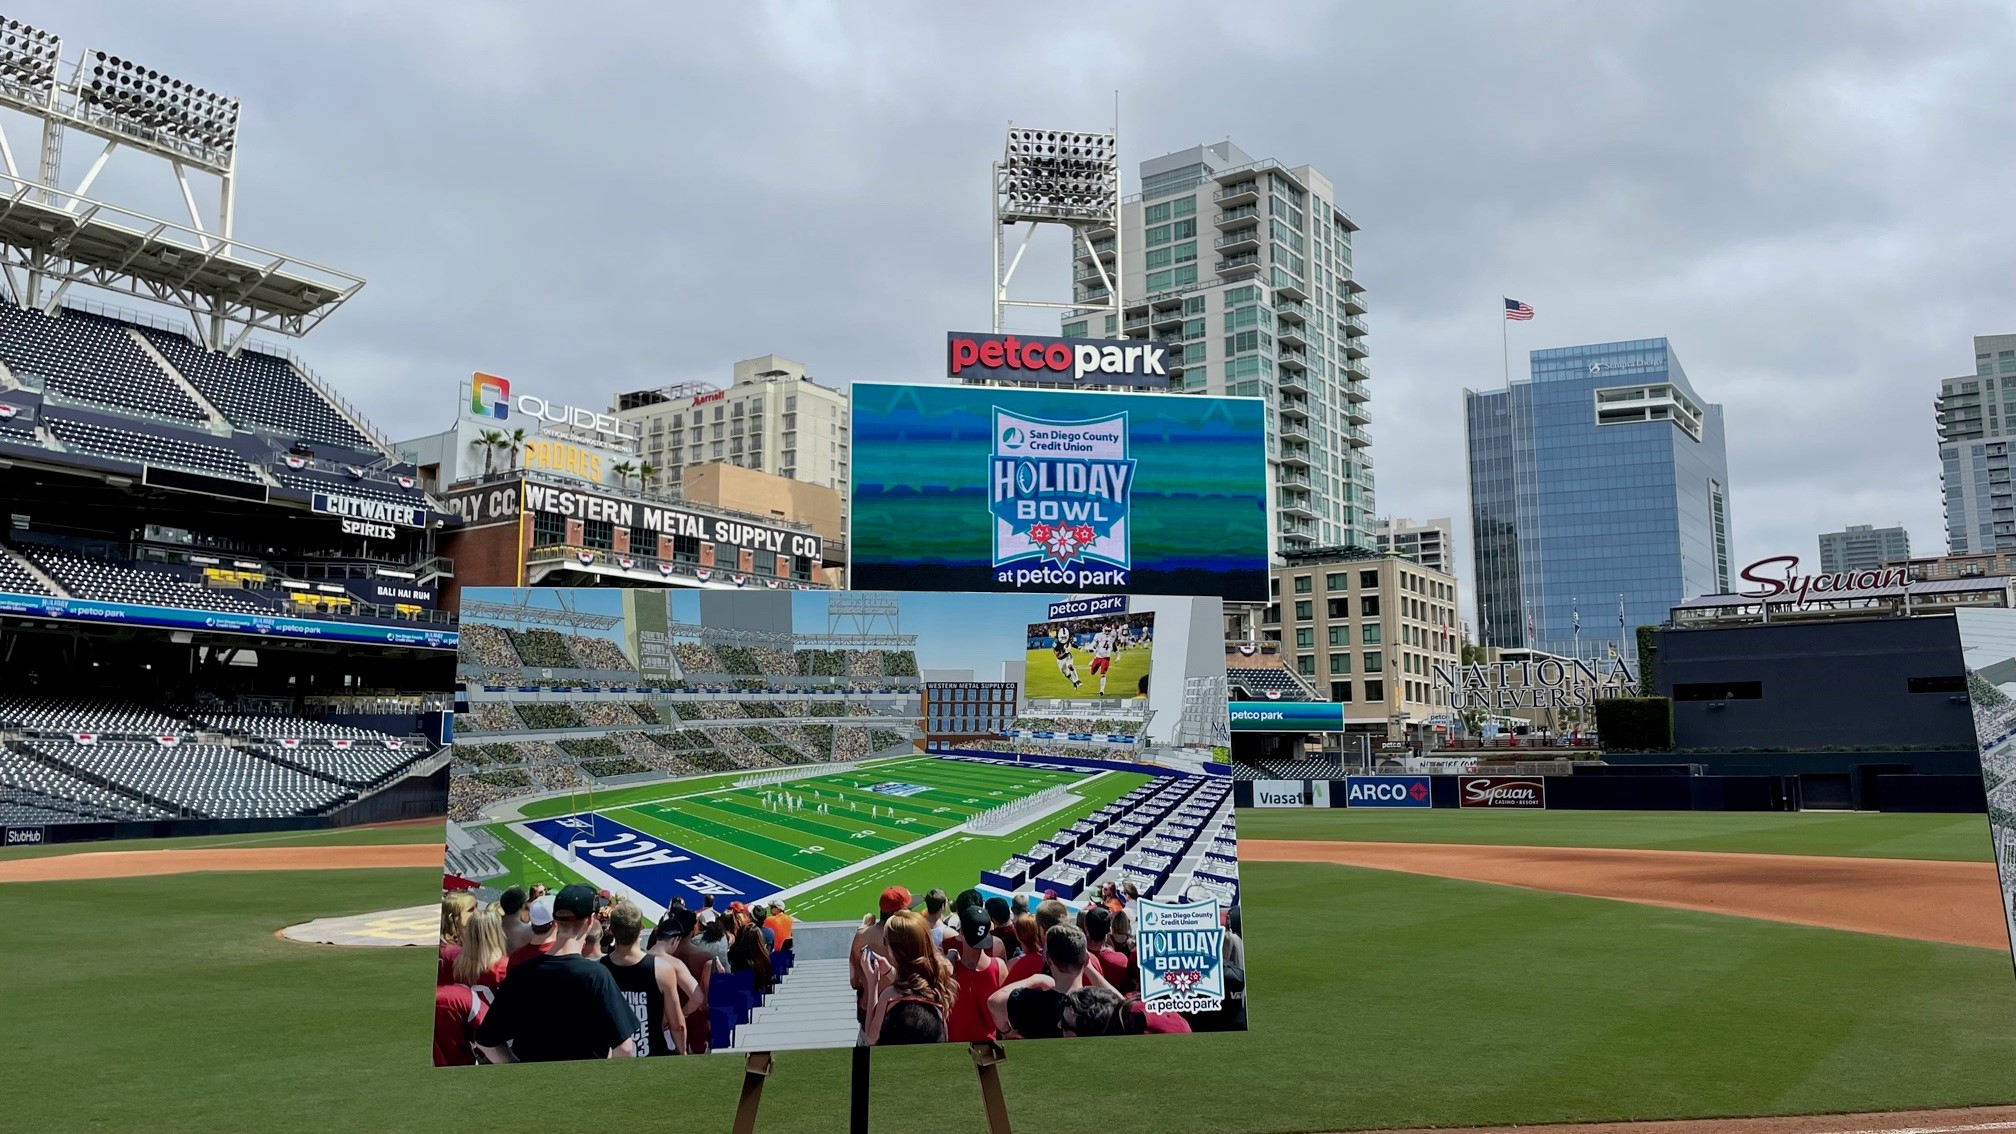 Holiday Bowl: How Petco Park landed the game, and what you should